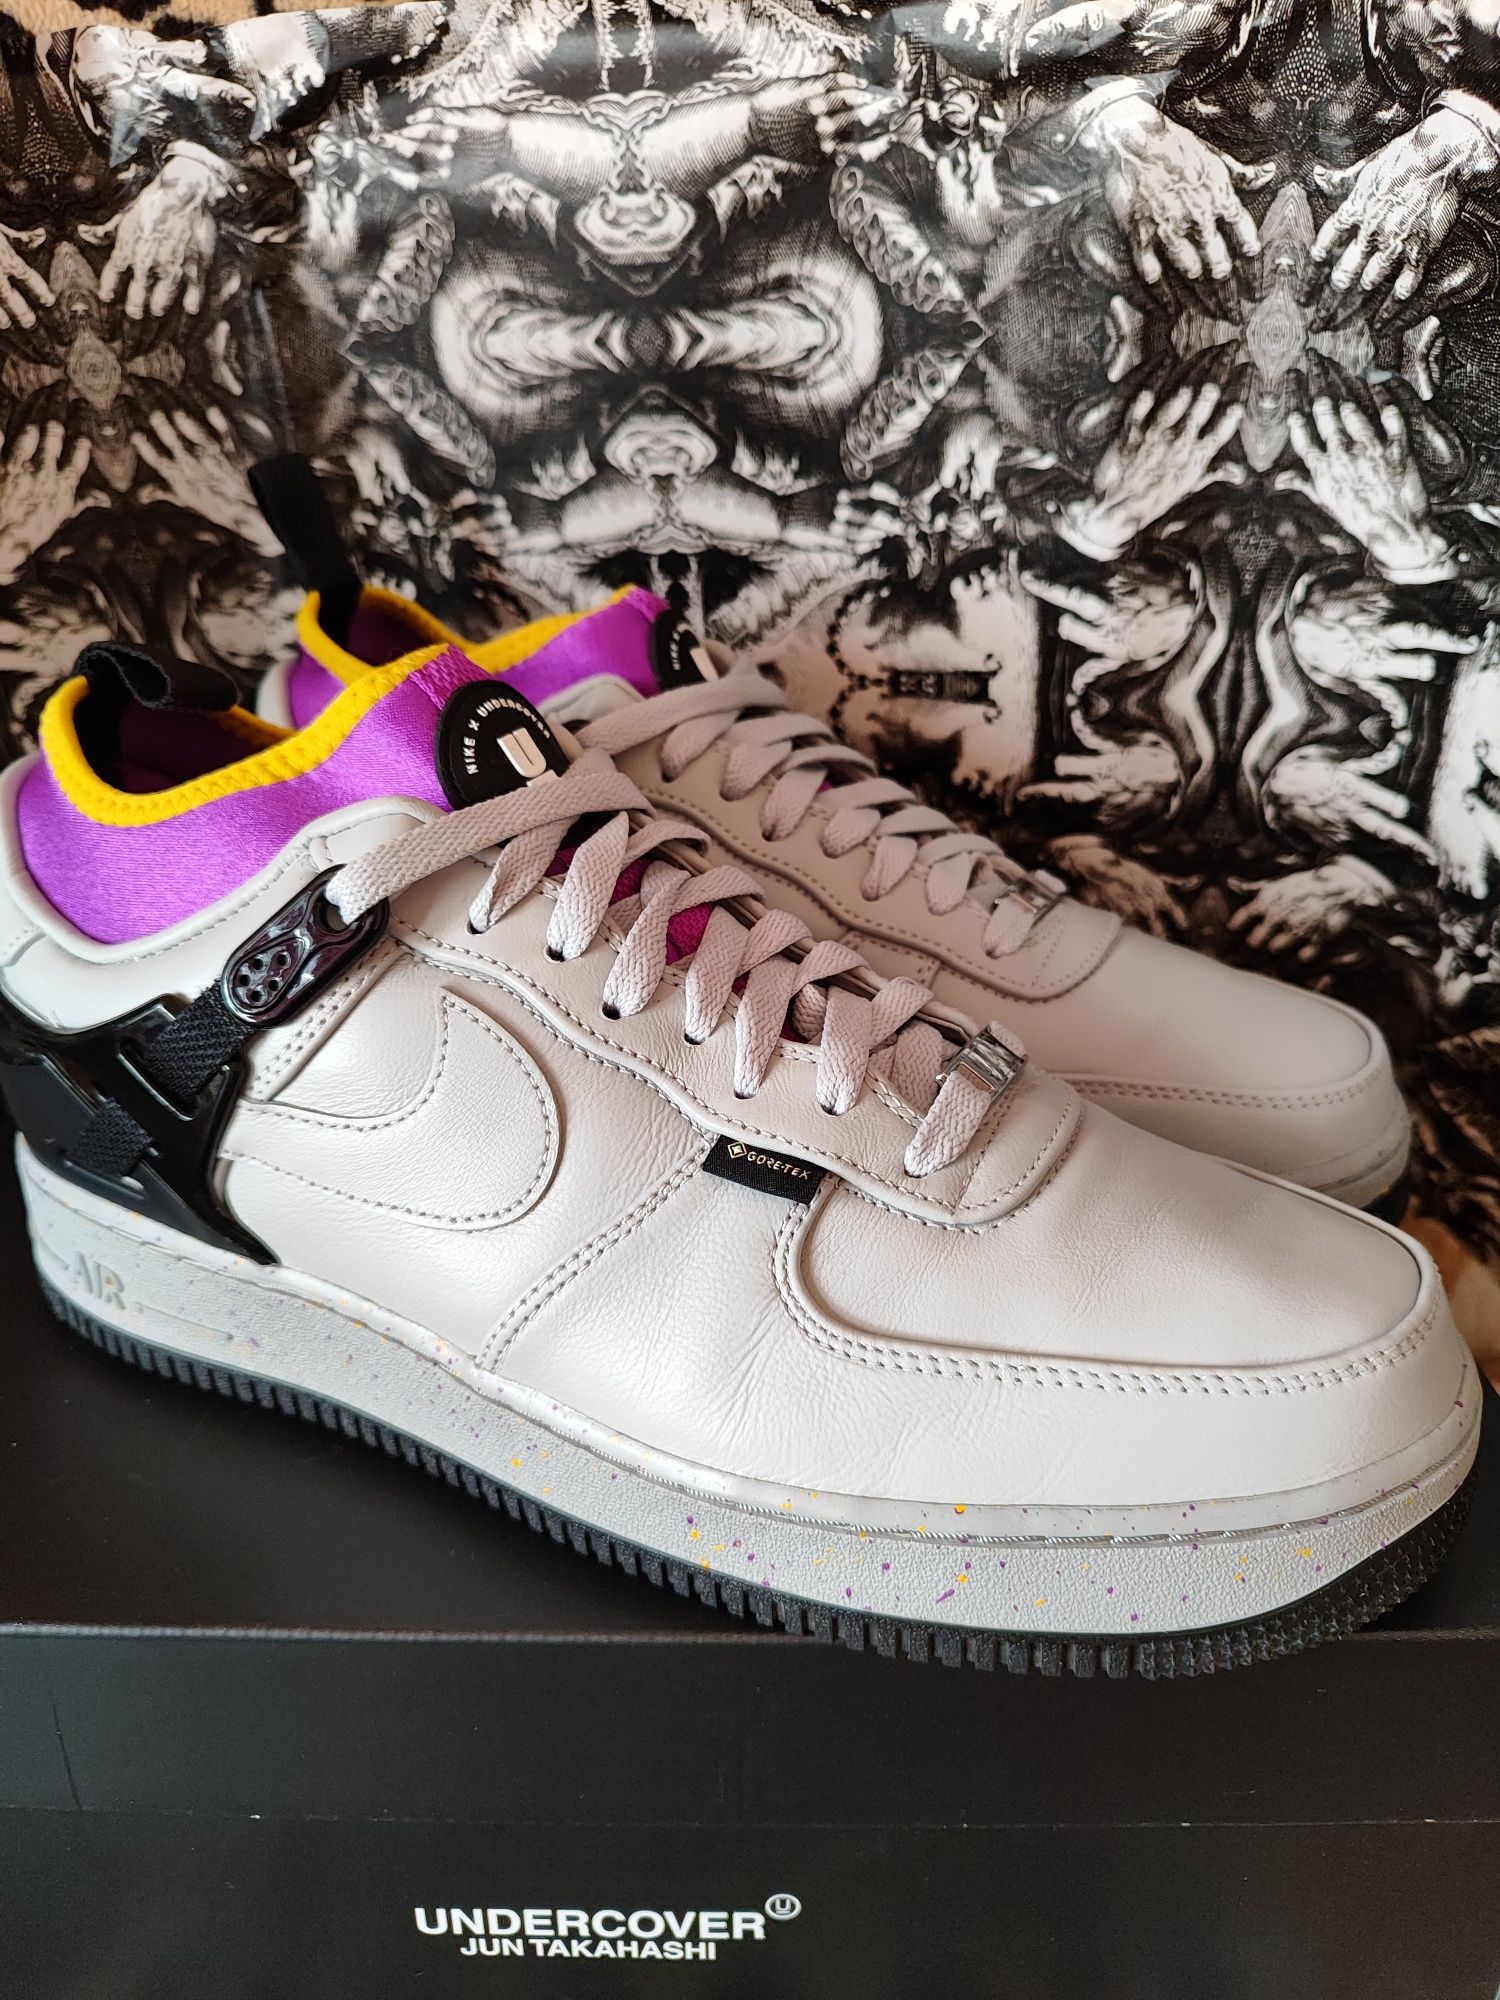 Nike Air Force 1 Low x Undercover Gore-Tex US 10.5, EUR 44.5, CM 28.5